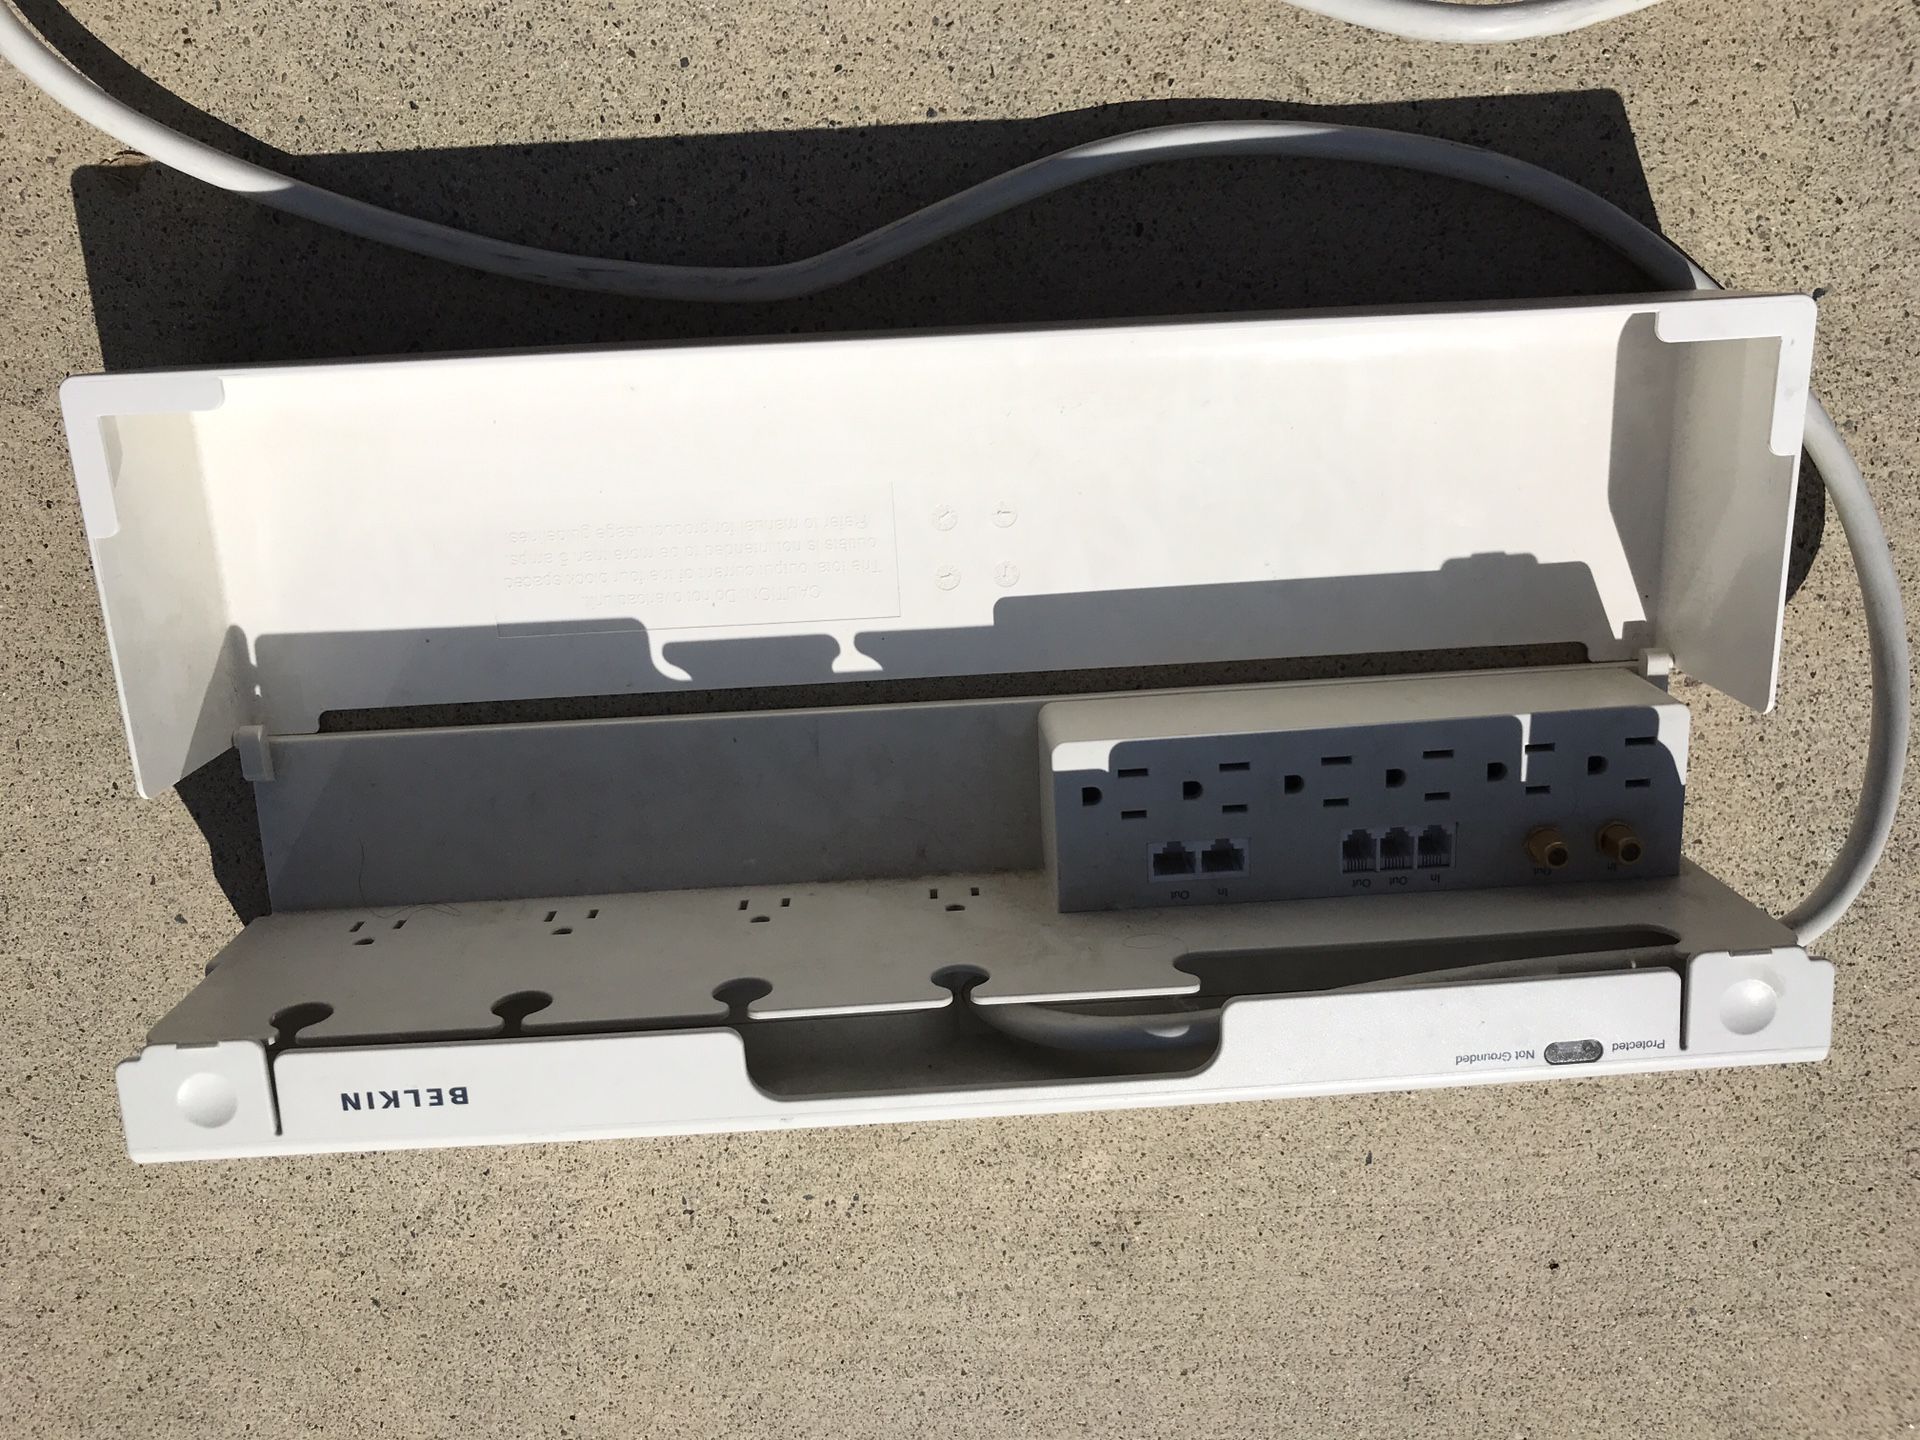 Belkin power surge protector with 11 outlets, protective cover, and long cable